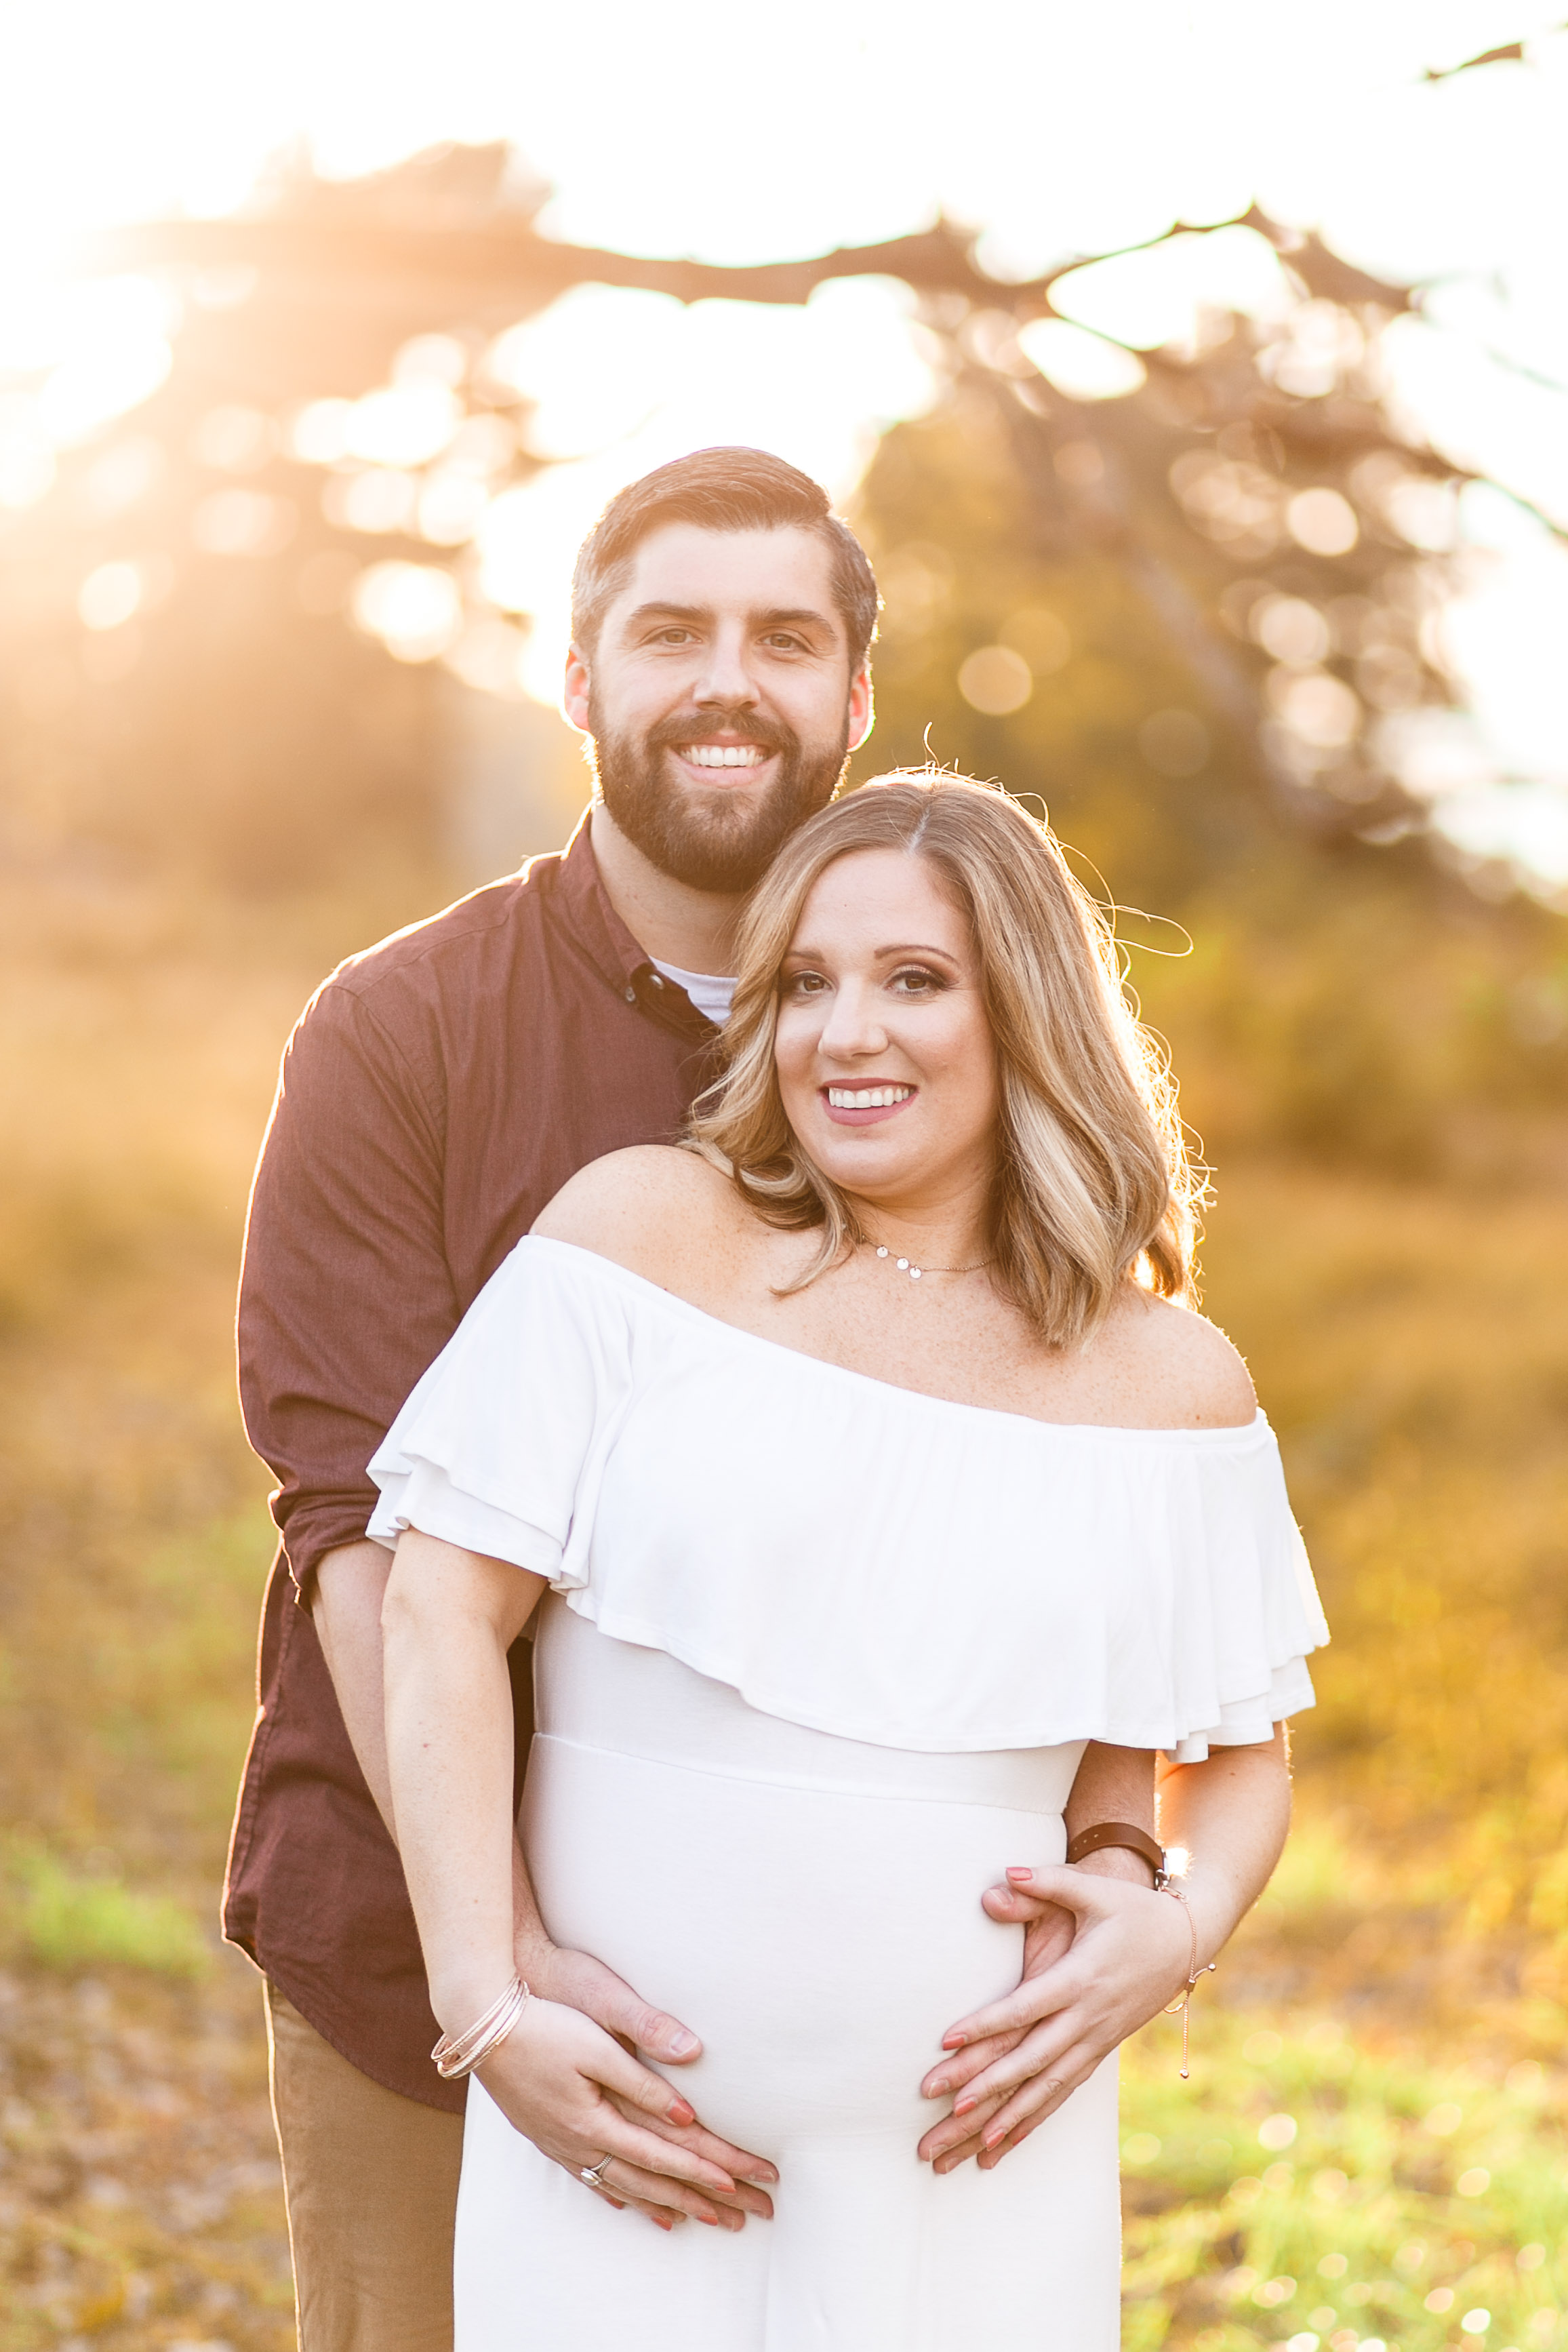 couples-maternity-announcement-pregnancy-fall-photo-session